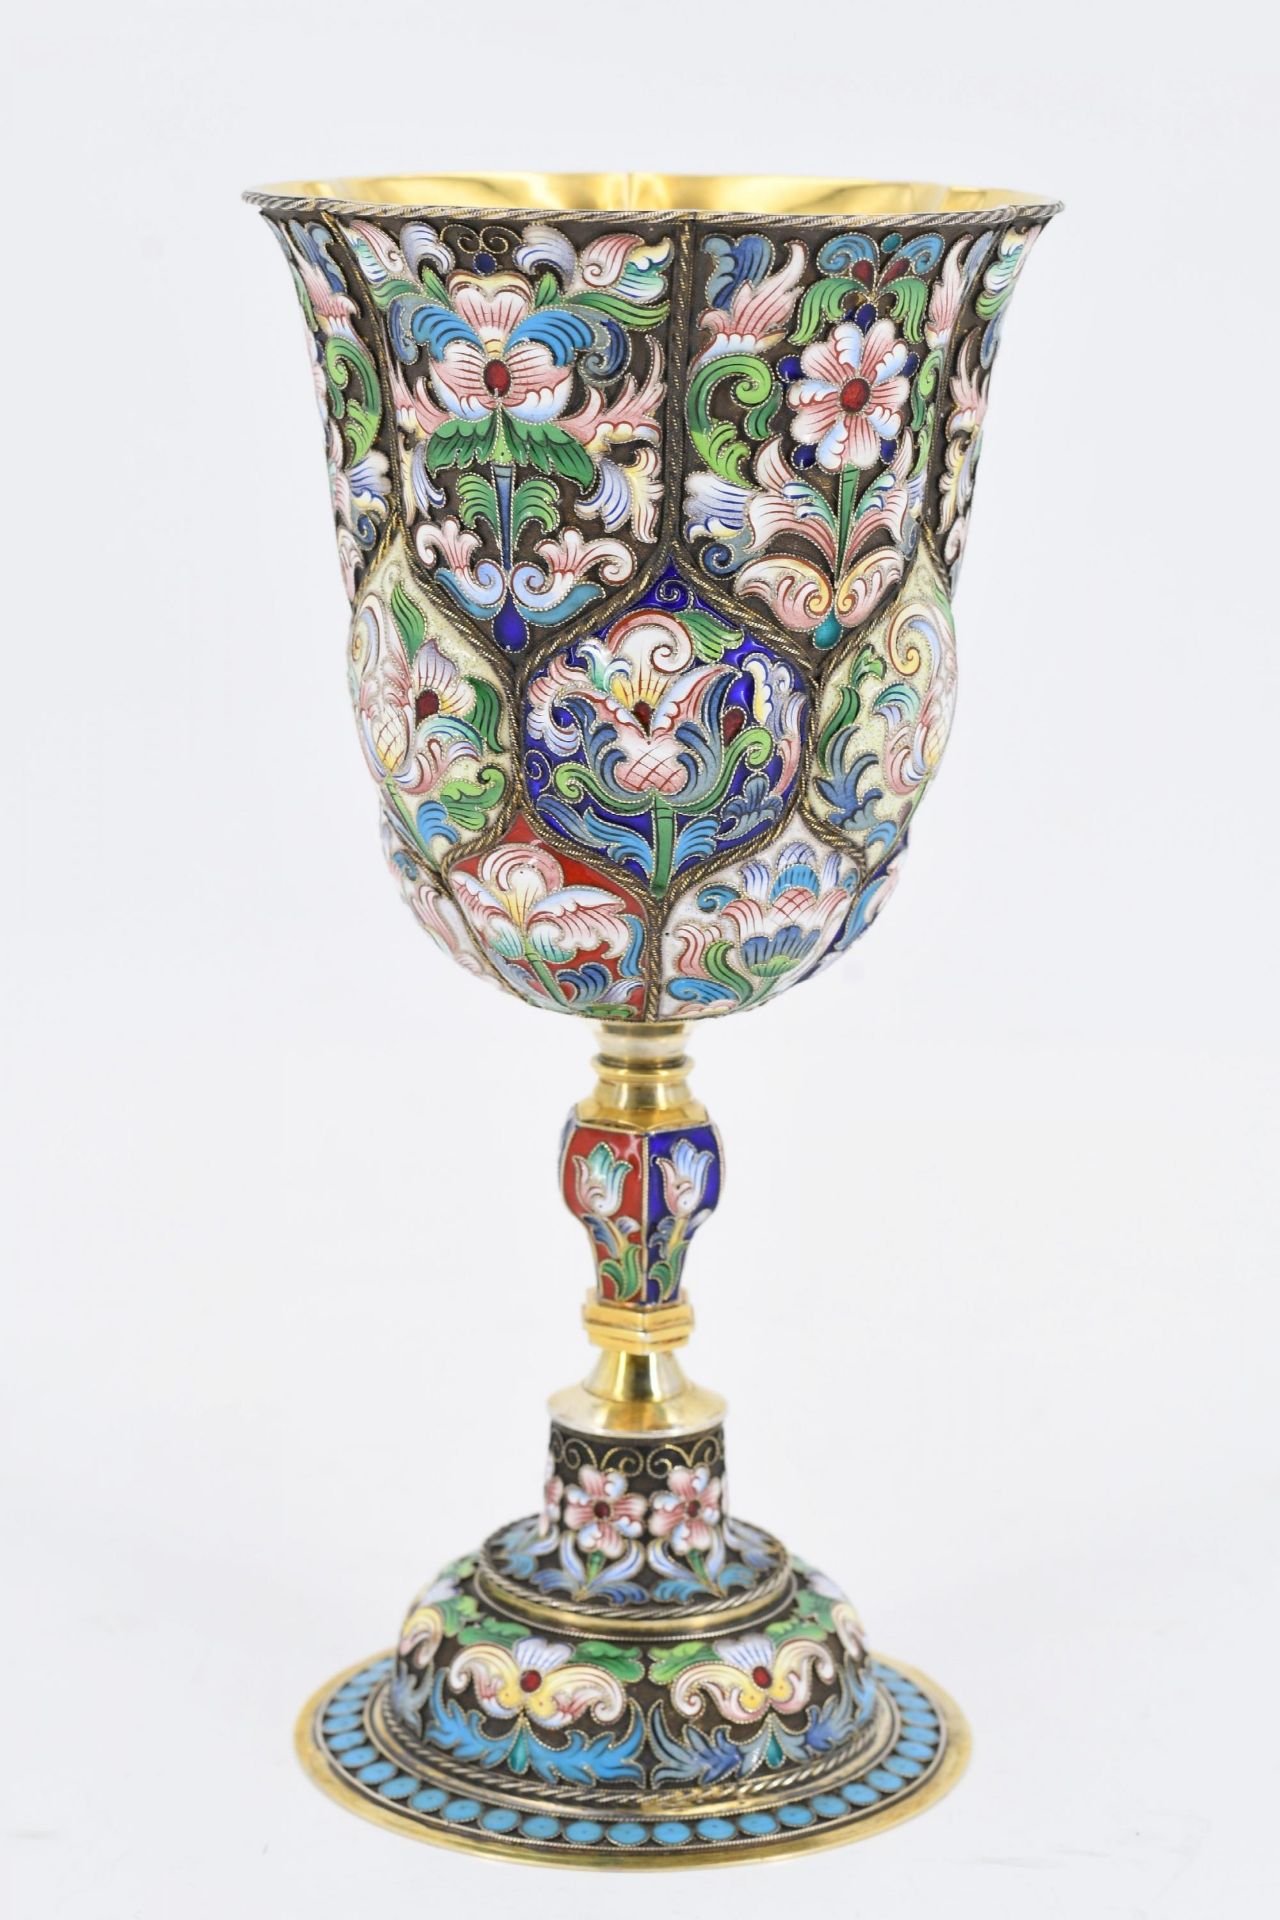 PRECIOUS SET OF SIX SILVER GOBLETS WITH CLOISONNÉ DECOR - Image 3 of 7